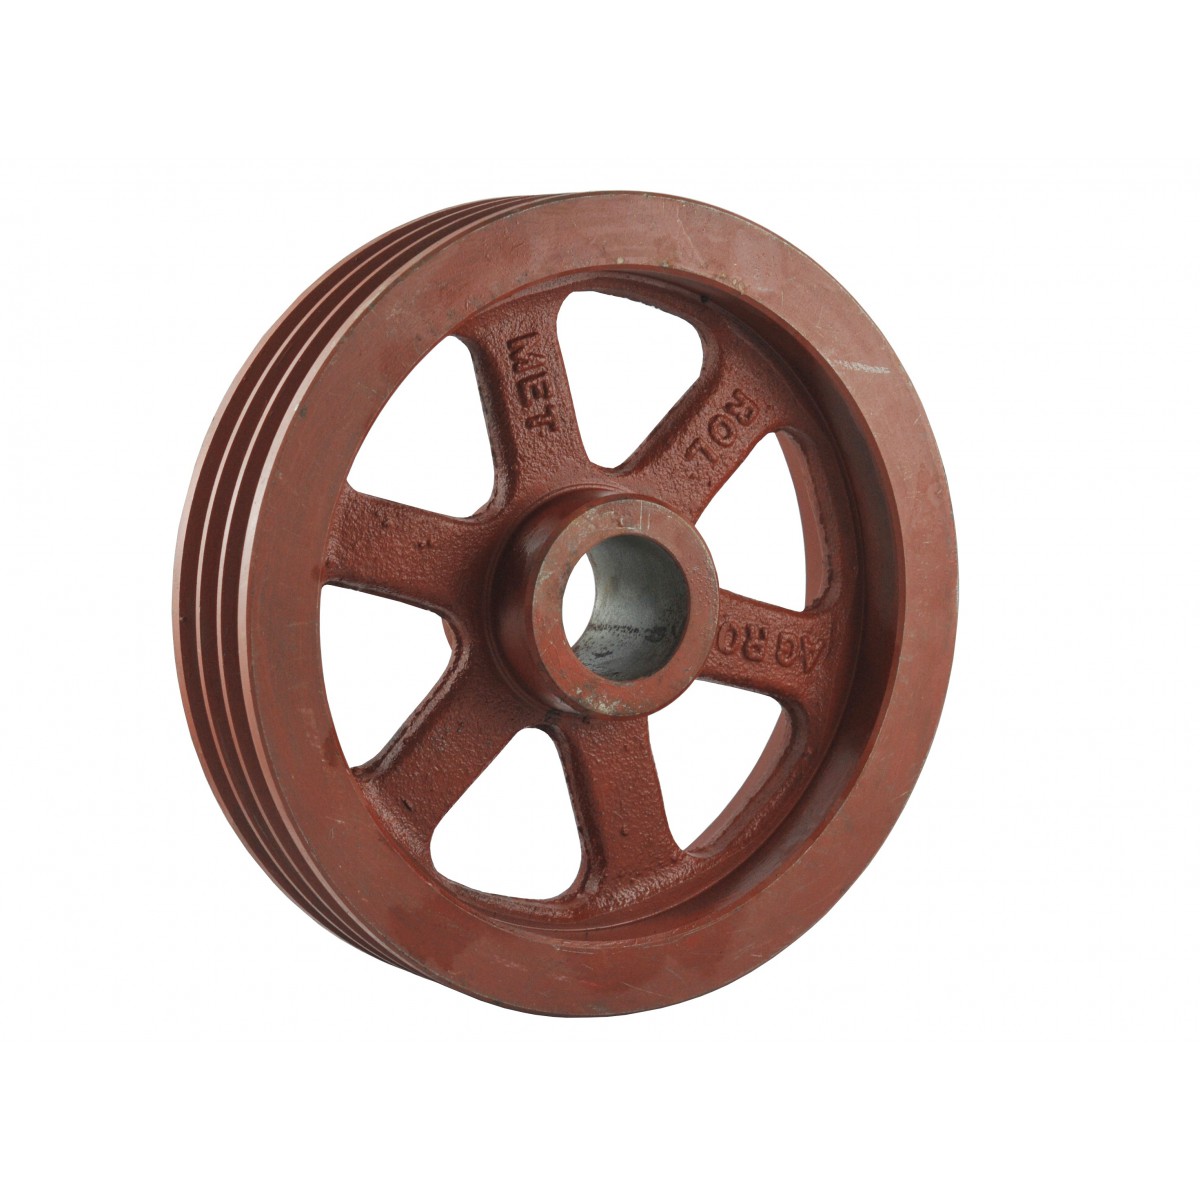 Pulley 280 x 50 x 62 mm for 3 belts A13, B13 for chipper and other machines